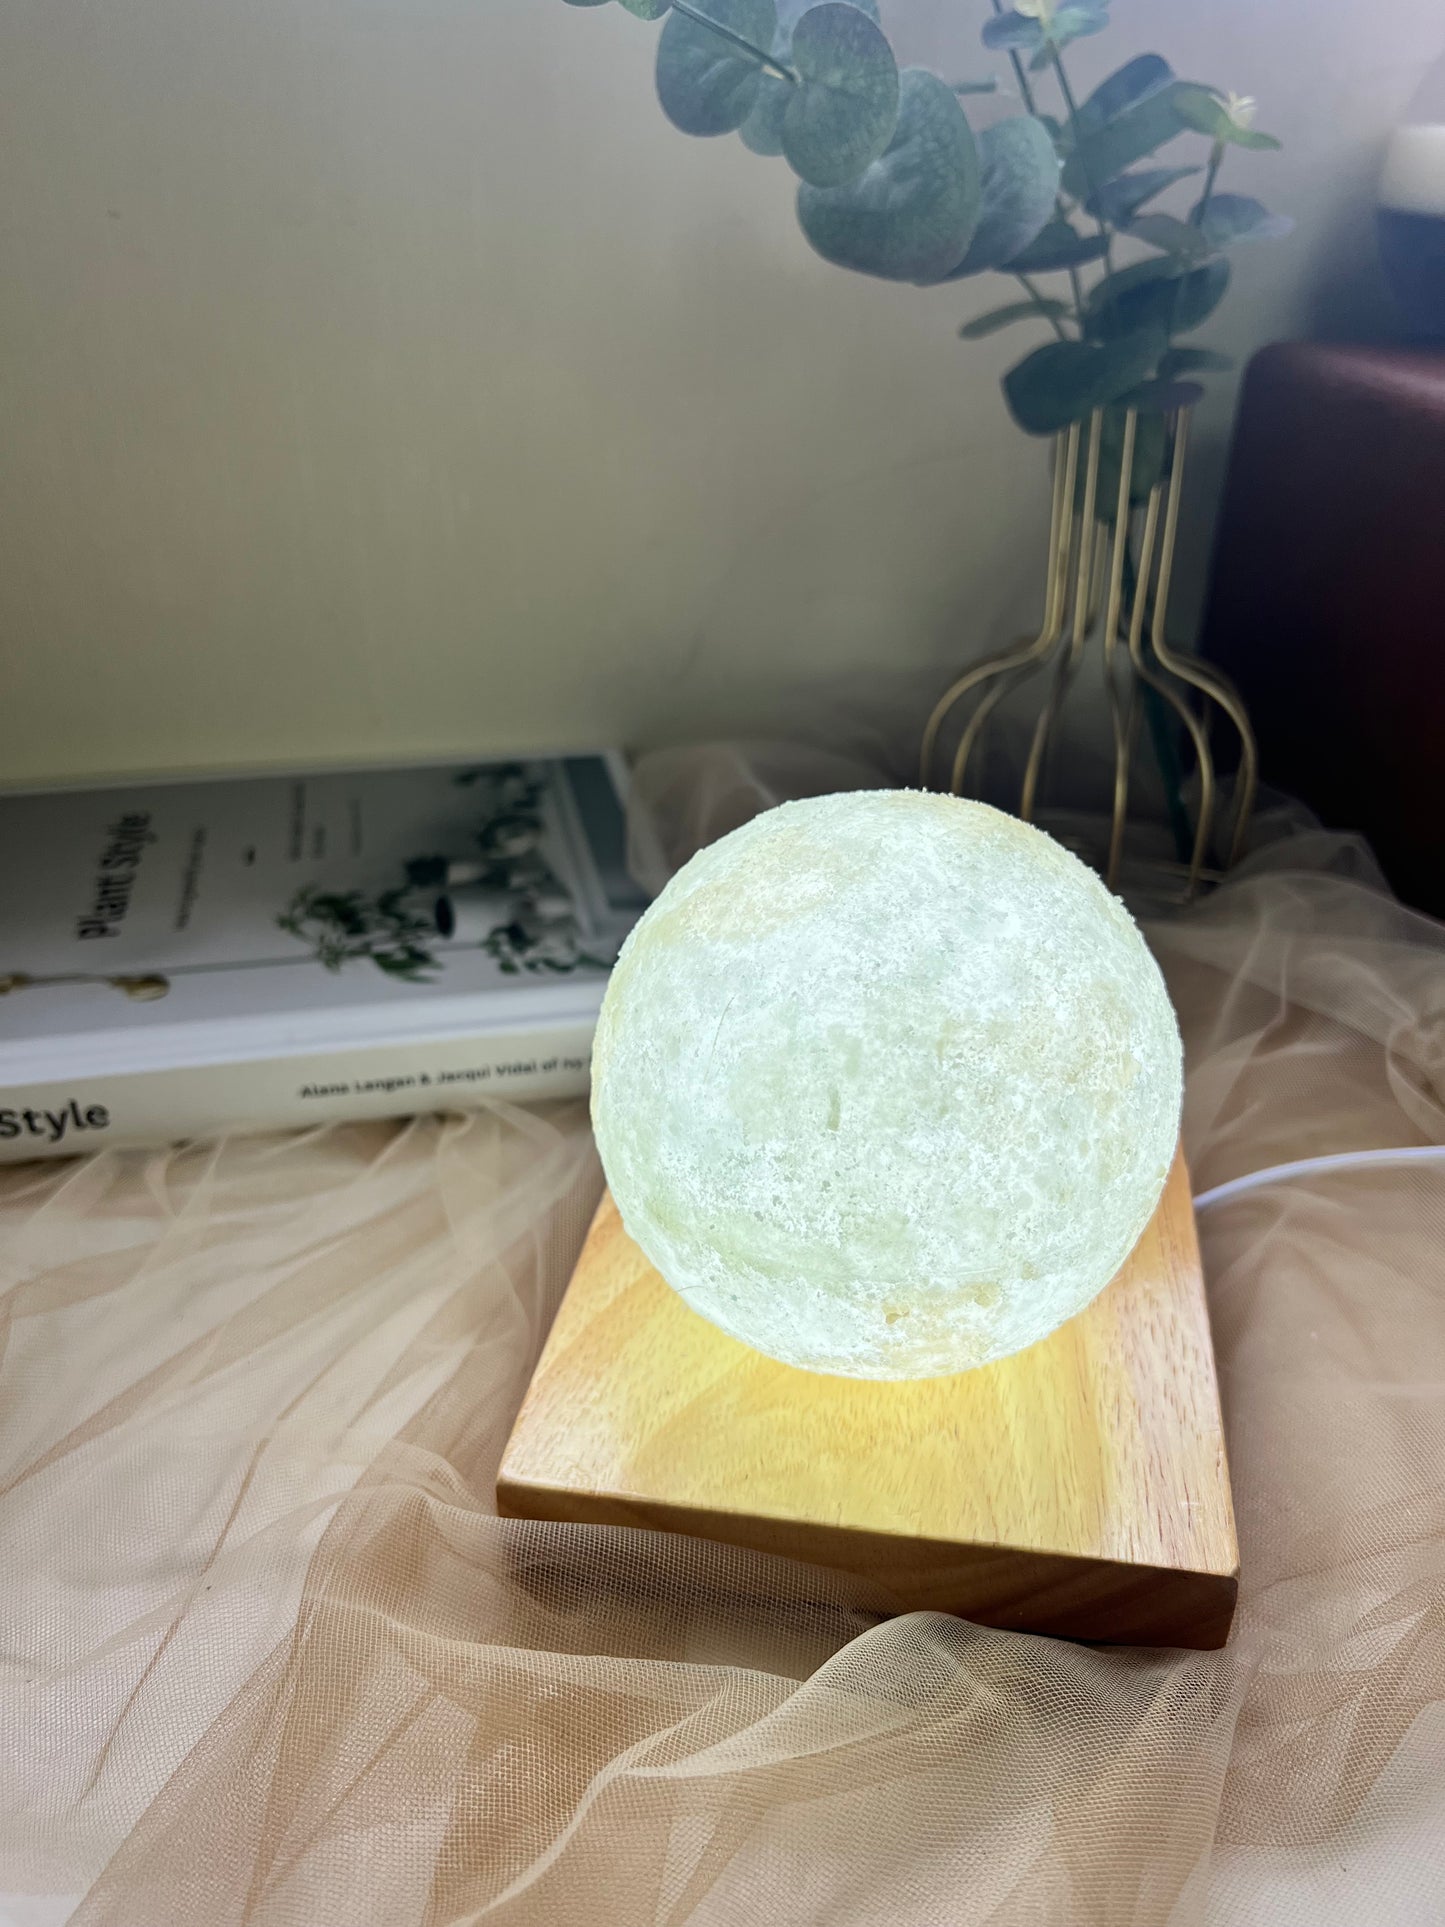 The Enchanting Glow: Handmade Scented Wax Nightlights with Wooden Light Plate